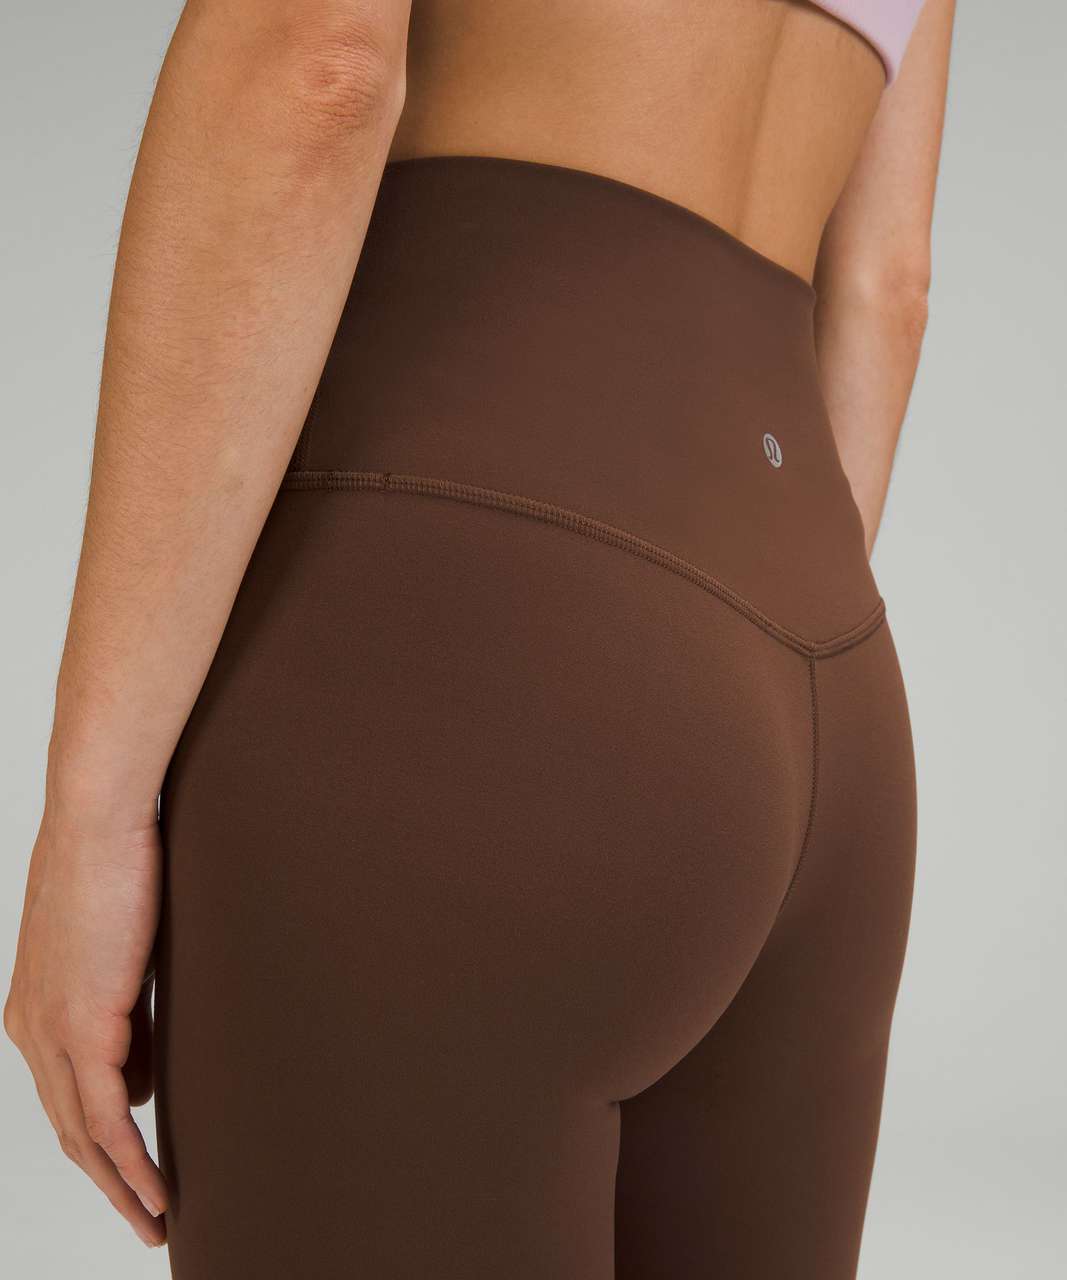 NEW Women Lululemon Align High-Rise Pant 25 Roasted Brown Size 4